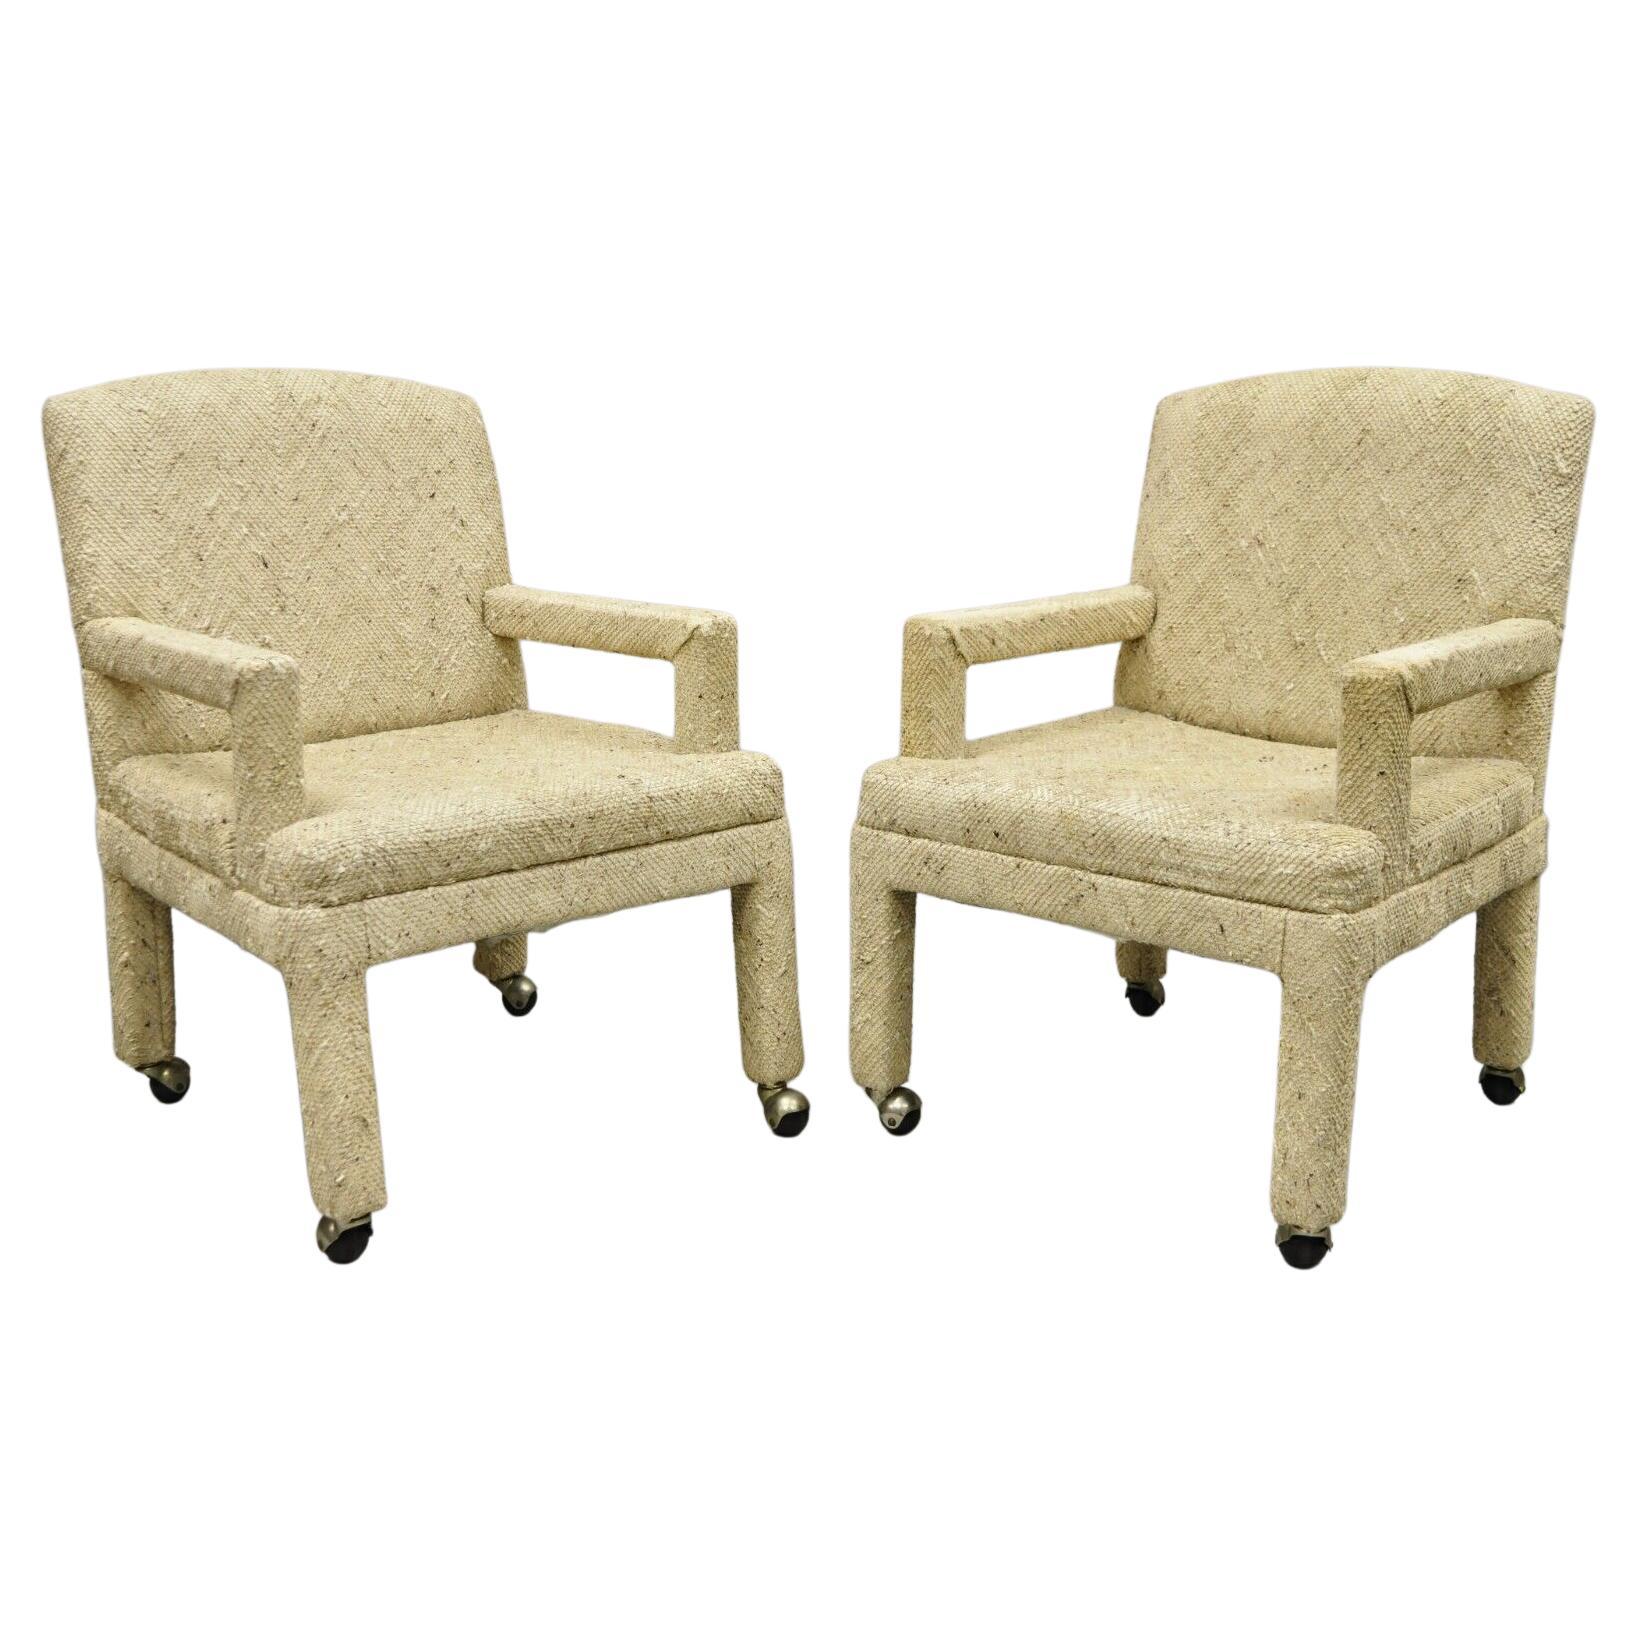 Pair Vintage Bassett Furniture Fully Upholstered Parson Style Club Lounge Chairs